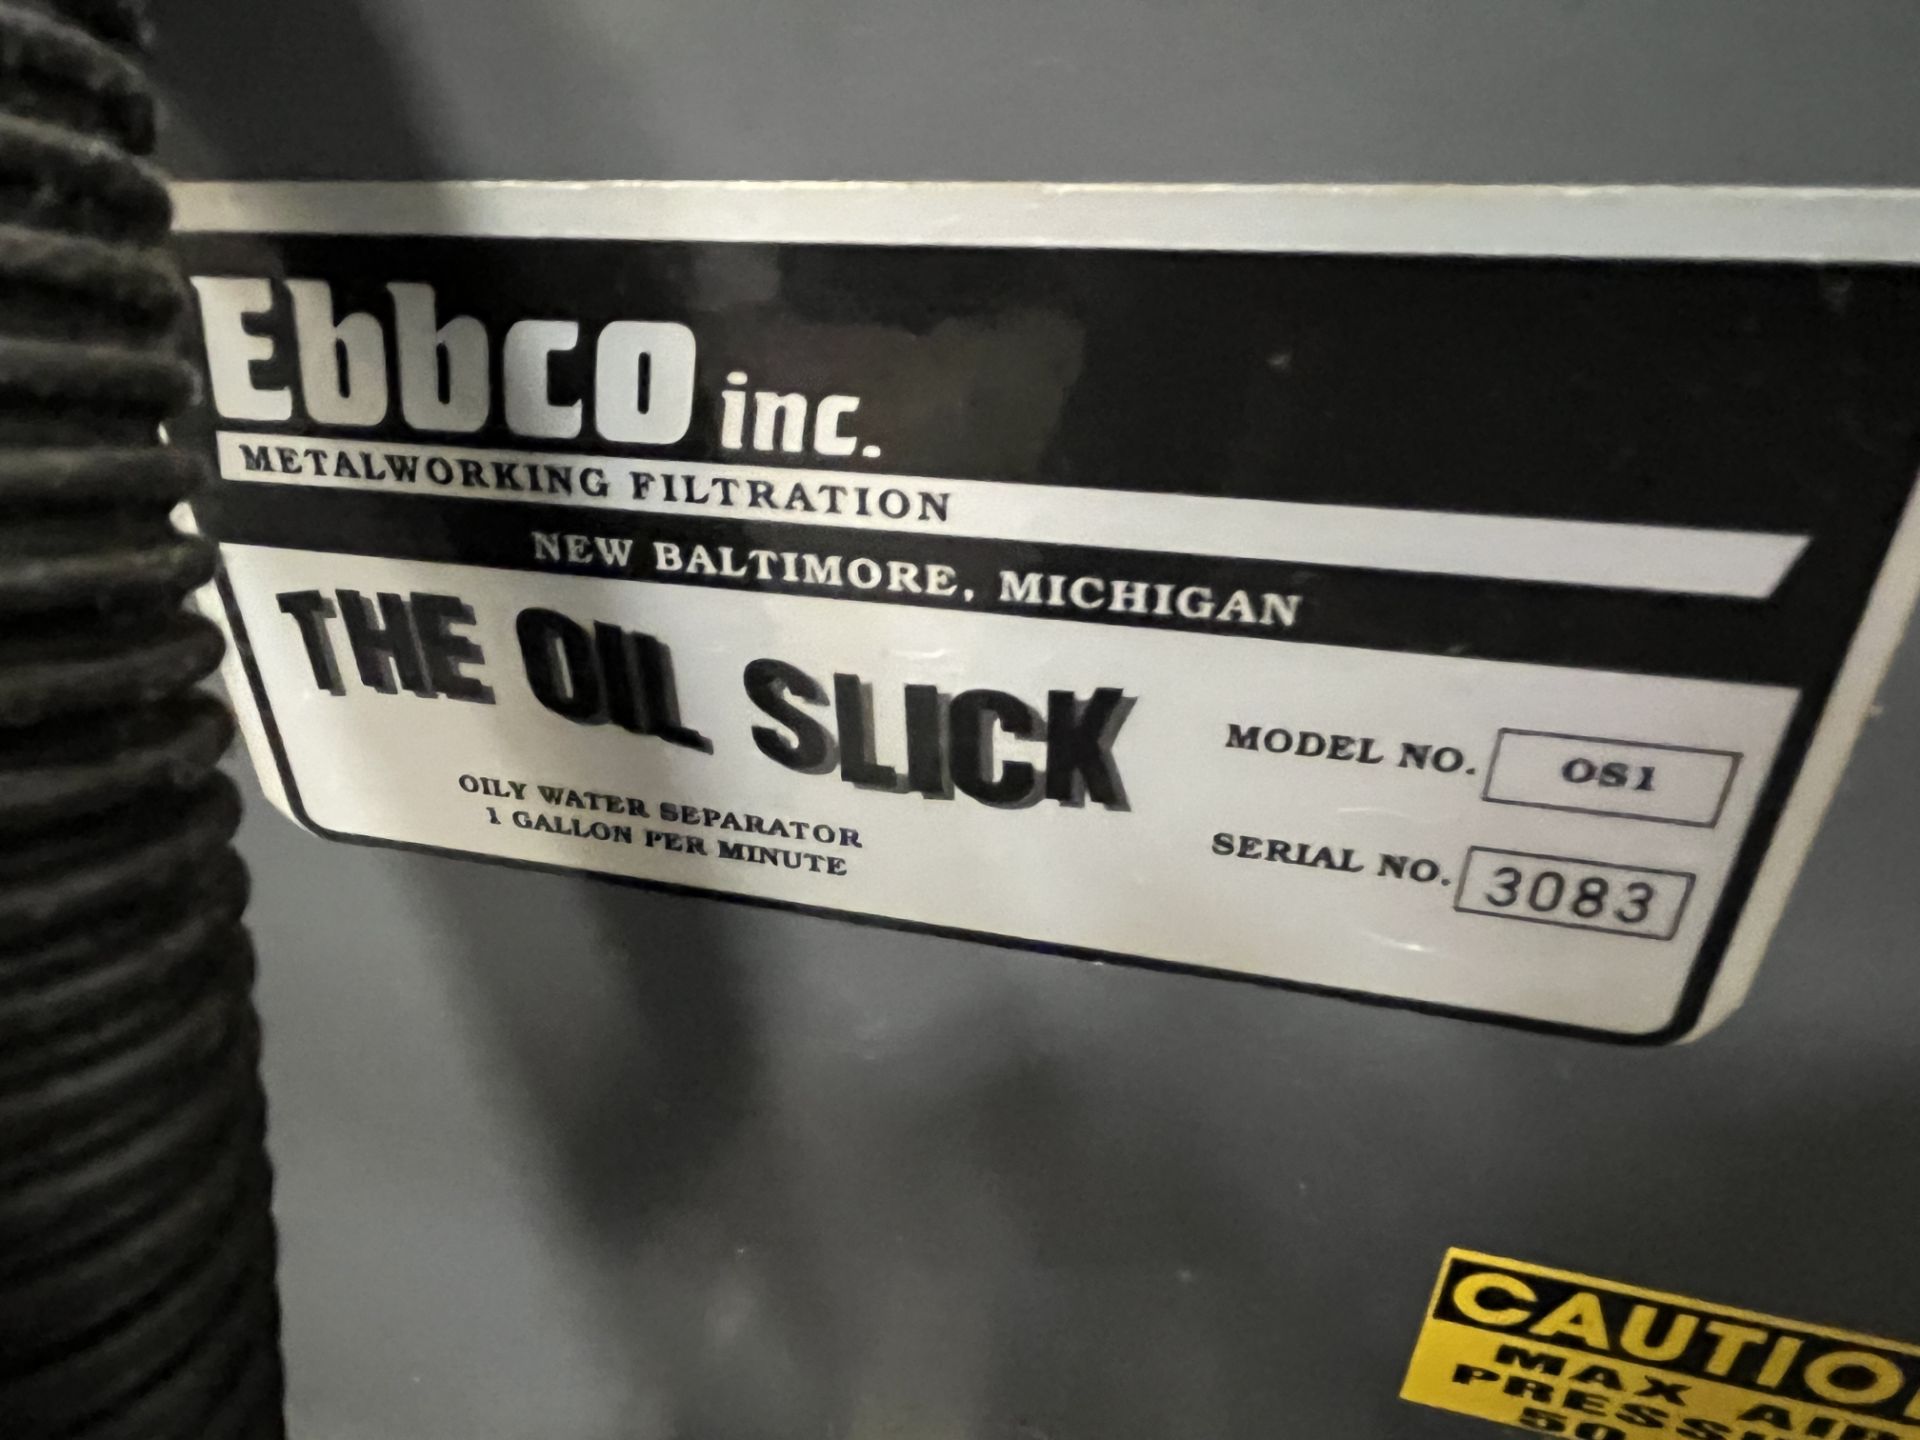 EBBCO INC. FCSL-01 FLUID CONDITIONING VESSEL, ETC. (LOCATED AT 1761 BISHOP STREET N, CAMBRIDGE, - Image 3 of 5